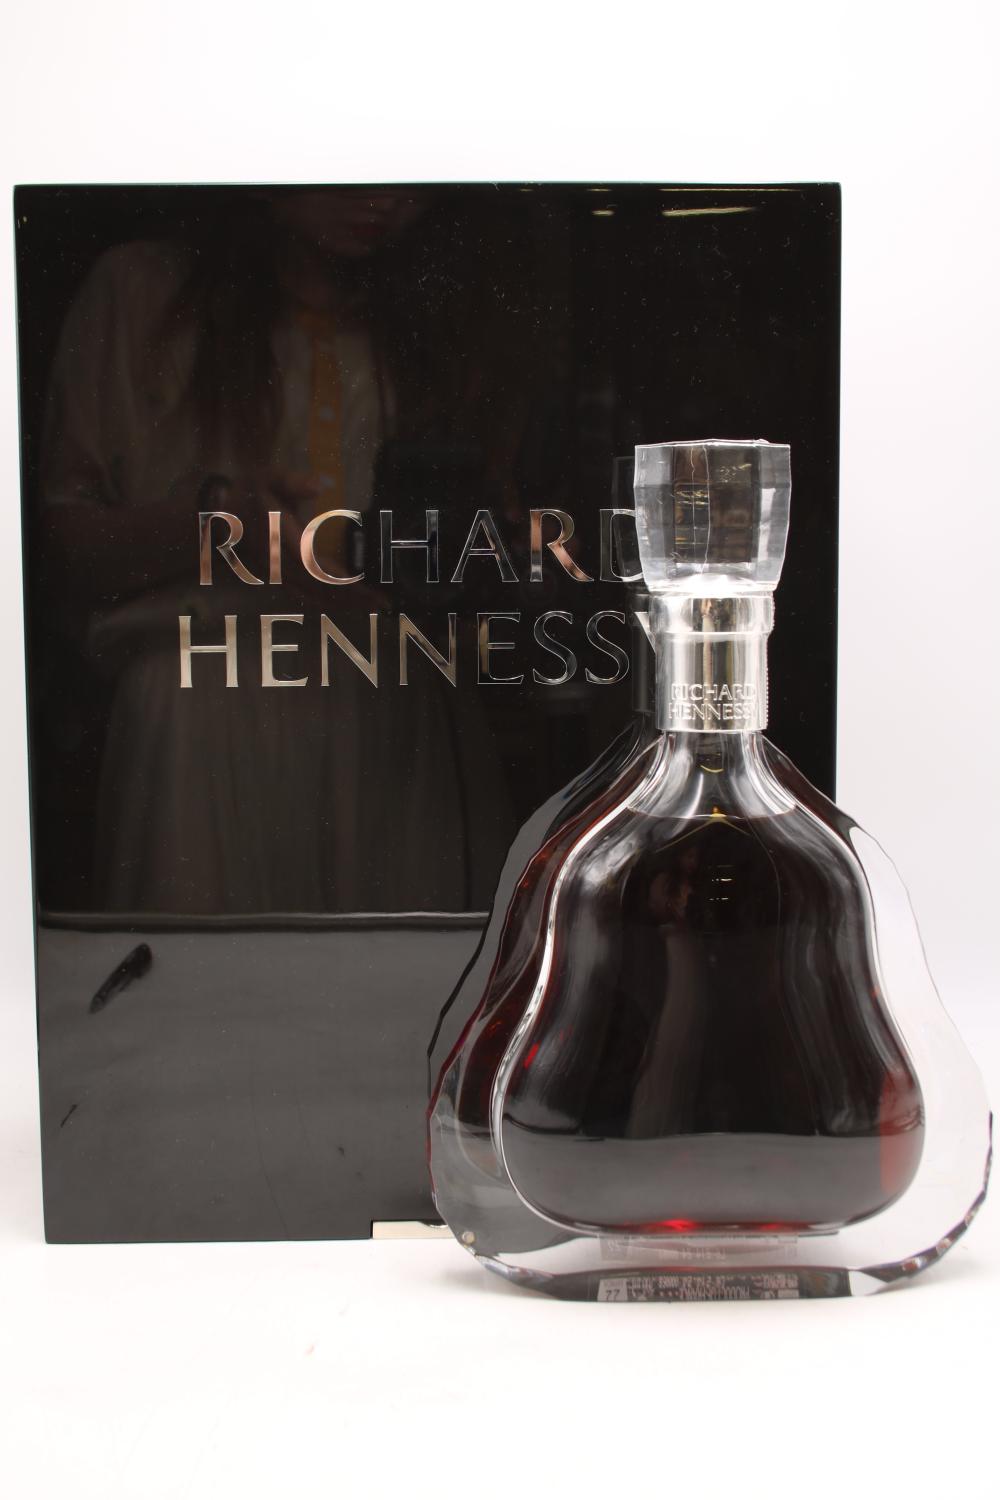 BUY] Richard Hennessy Cognac (RECOMMENDED) at